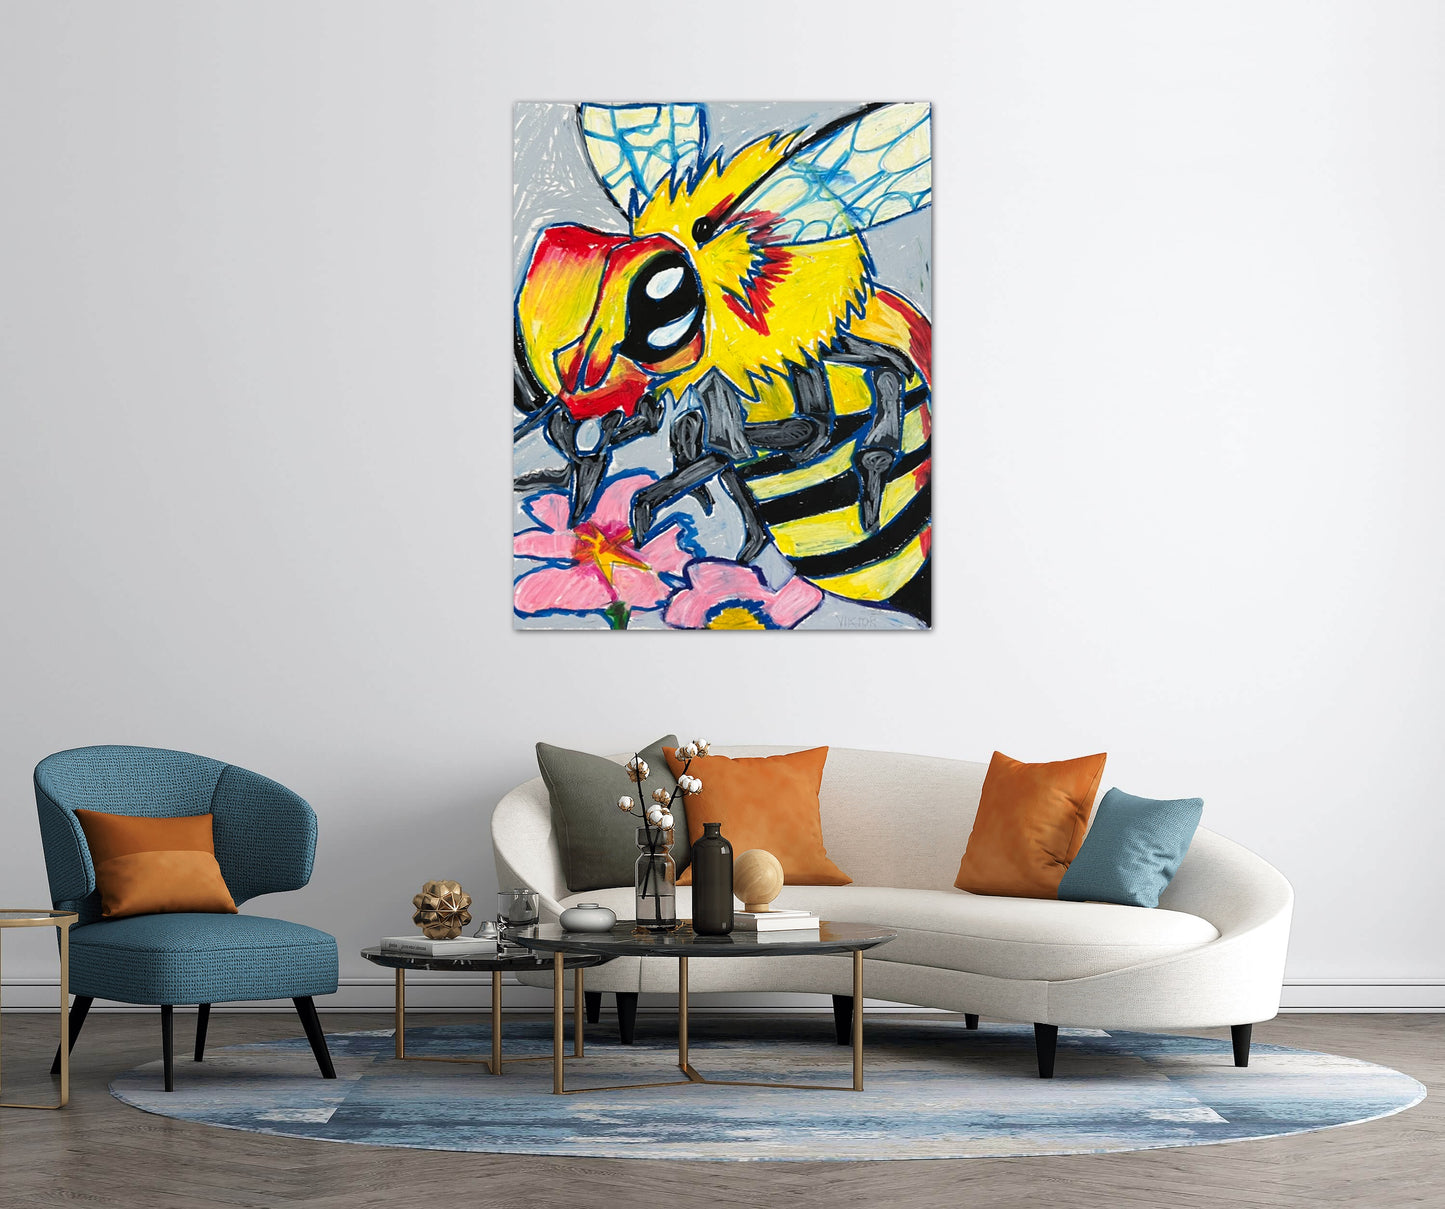 Buzz - Print, Poster, Stretched Canvas Print